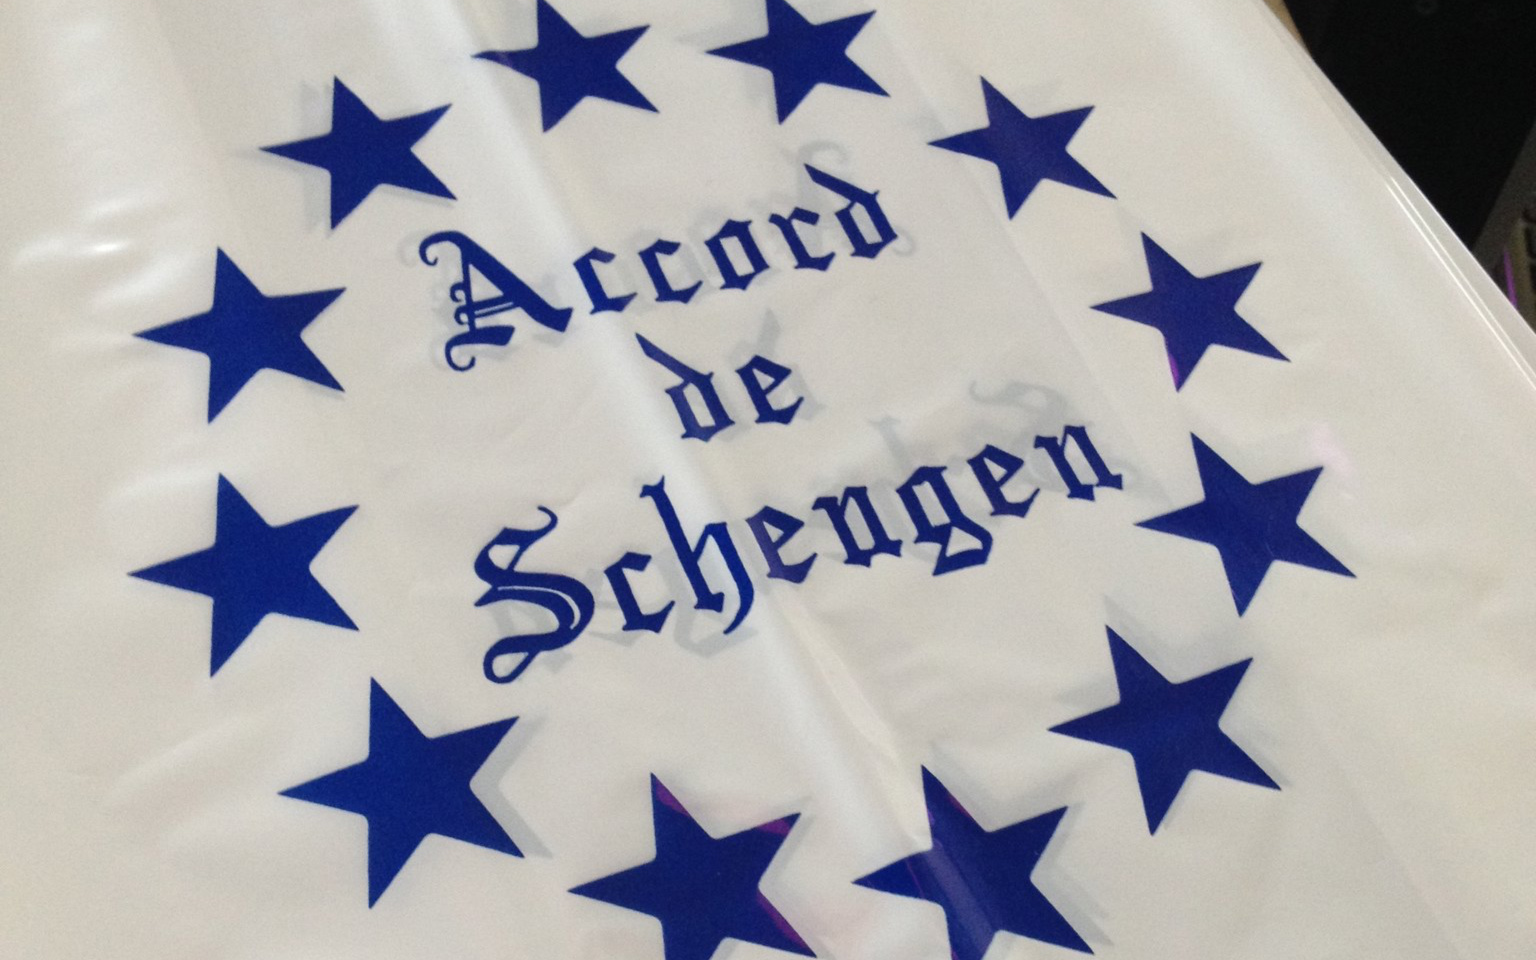 Image: A plastic sheet with "Accord de Schengen" written in calligraphy surrounded by blue stars